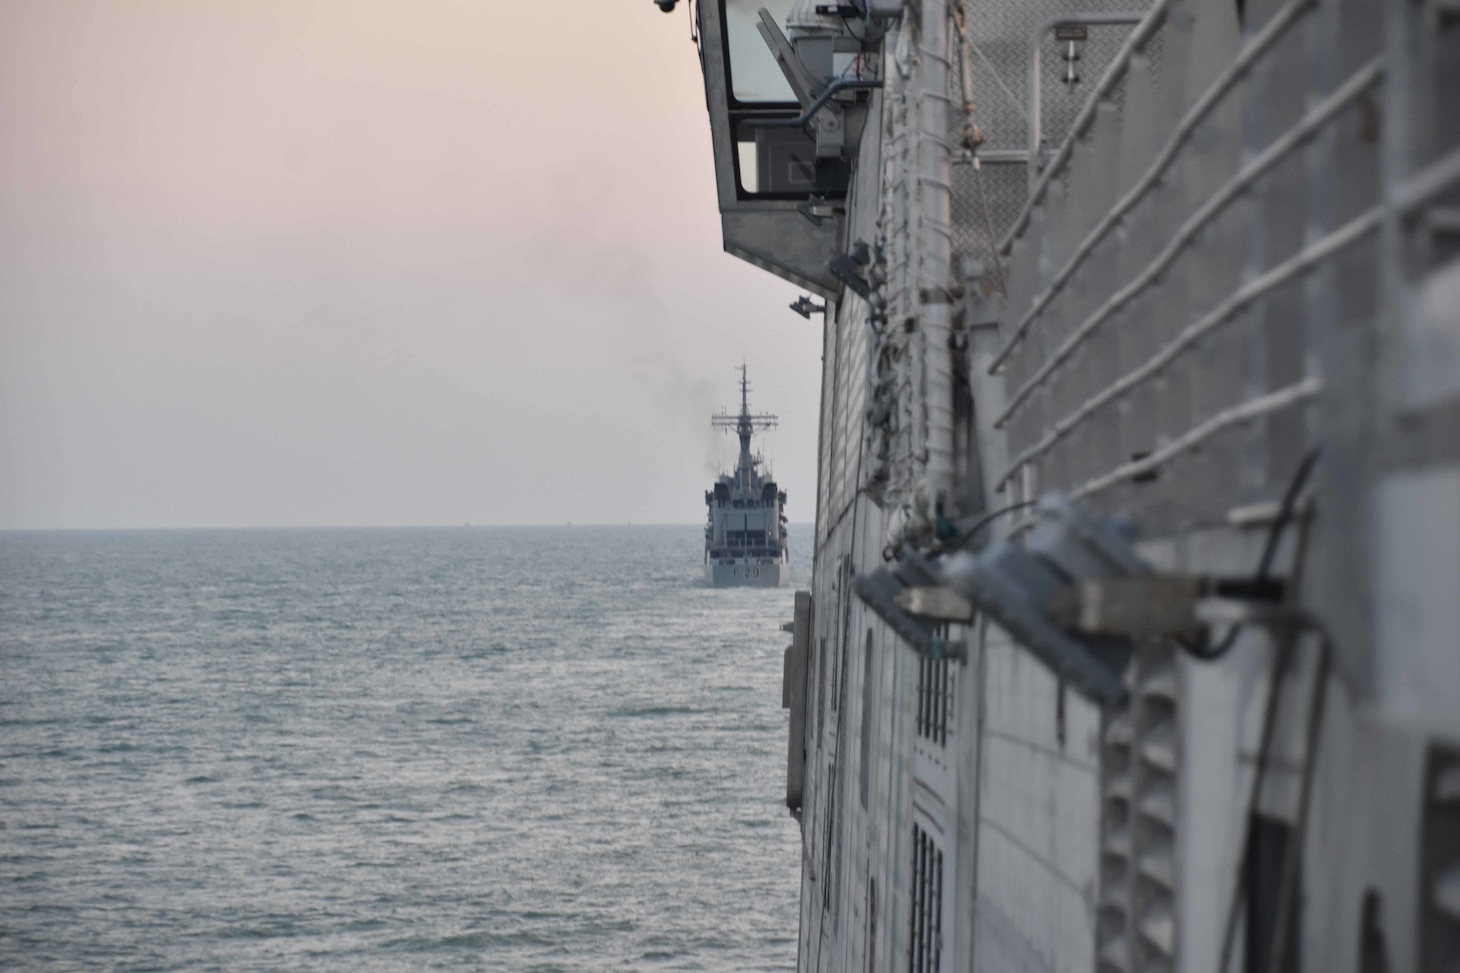 BAY OF BENGAL (Nov. 5, 2020) Ships from the Bangladesh Navy meet with USNS Millinocket (T-EPF 3) in the Bay of Bengal as part of the sea phase of Cooperation Afloat Readiness and Training (CARAT) Bangladesh 2020. This year marks the 26th iteration of CARAT, a multinational exercise designed to enhance U.S. and partner navies' abilities to operate together in response to traditional and non-traditional maritime security challenges in the Indo-Pacific region.